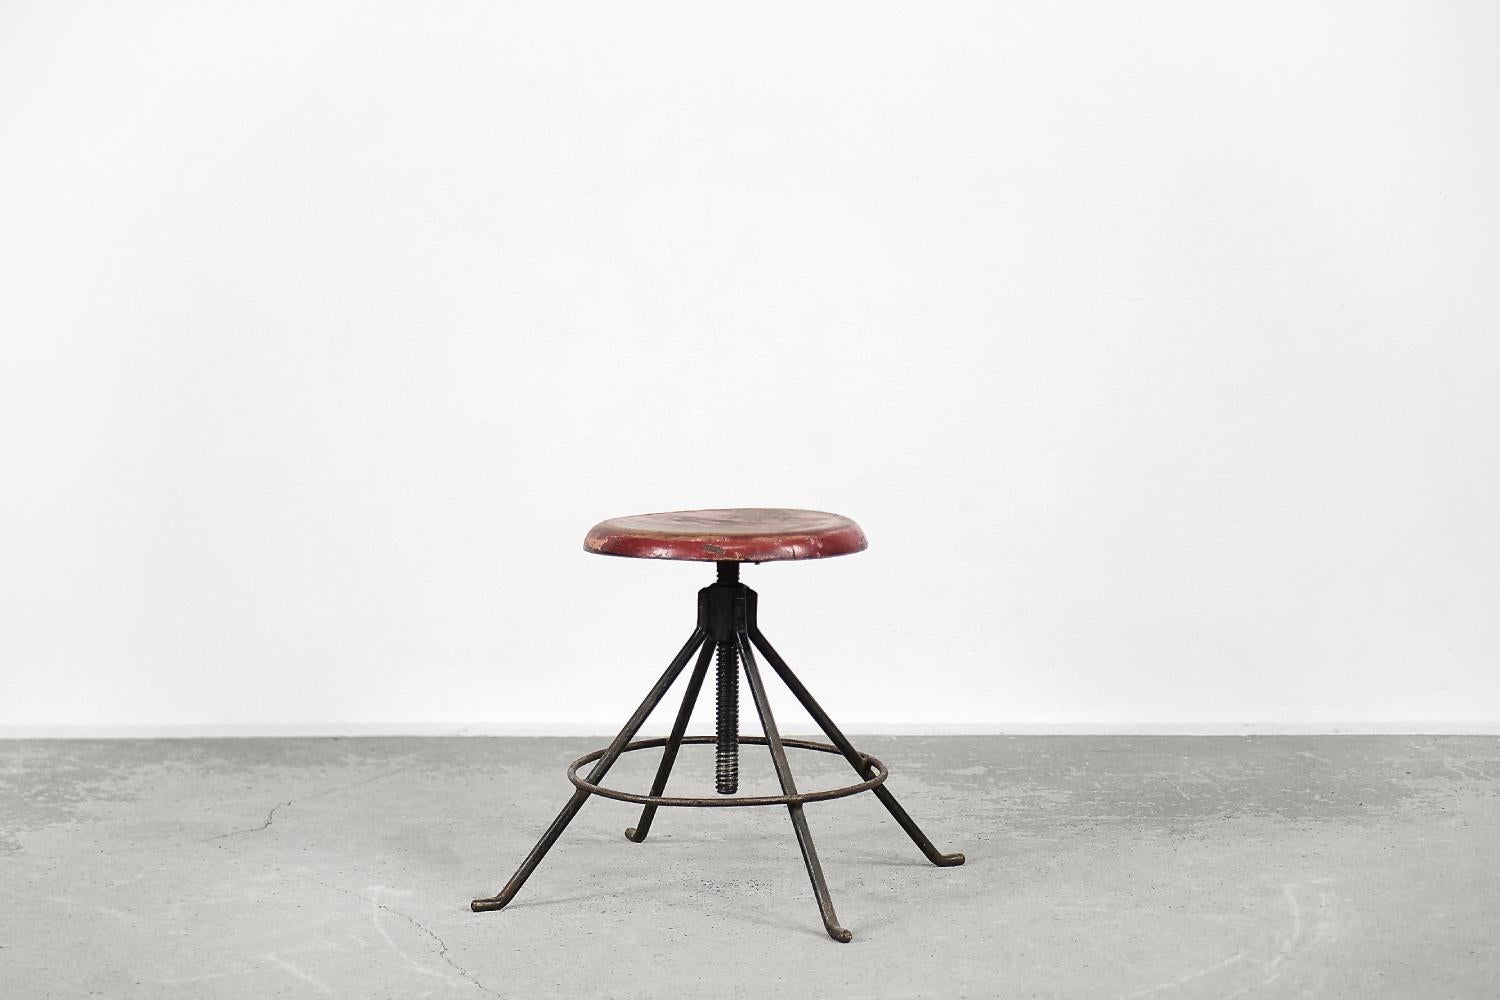 This swivel stool was made in Poland in the 1950s. The wooden, round seat in shades of red is mounted on a solid metal screw. Four metal legs are connected to each other. The seat can be adjusted from 44 cm to 69 cm. It will be perfect for